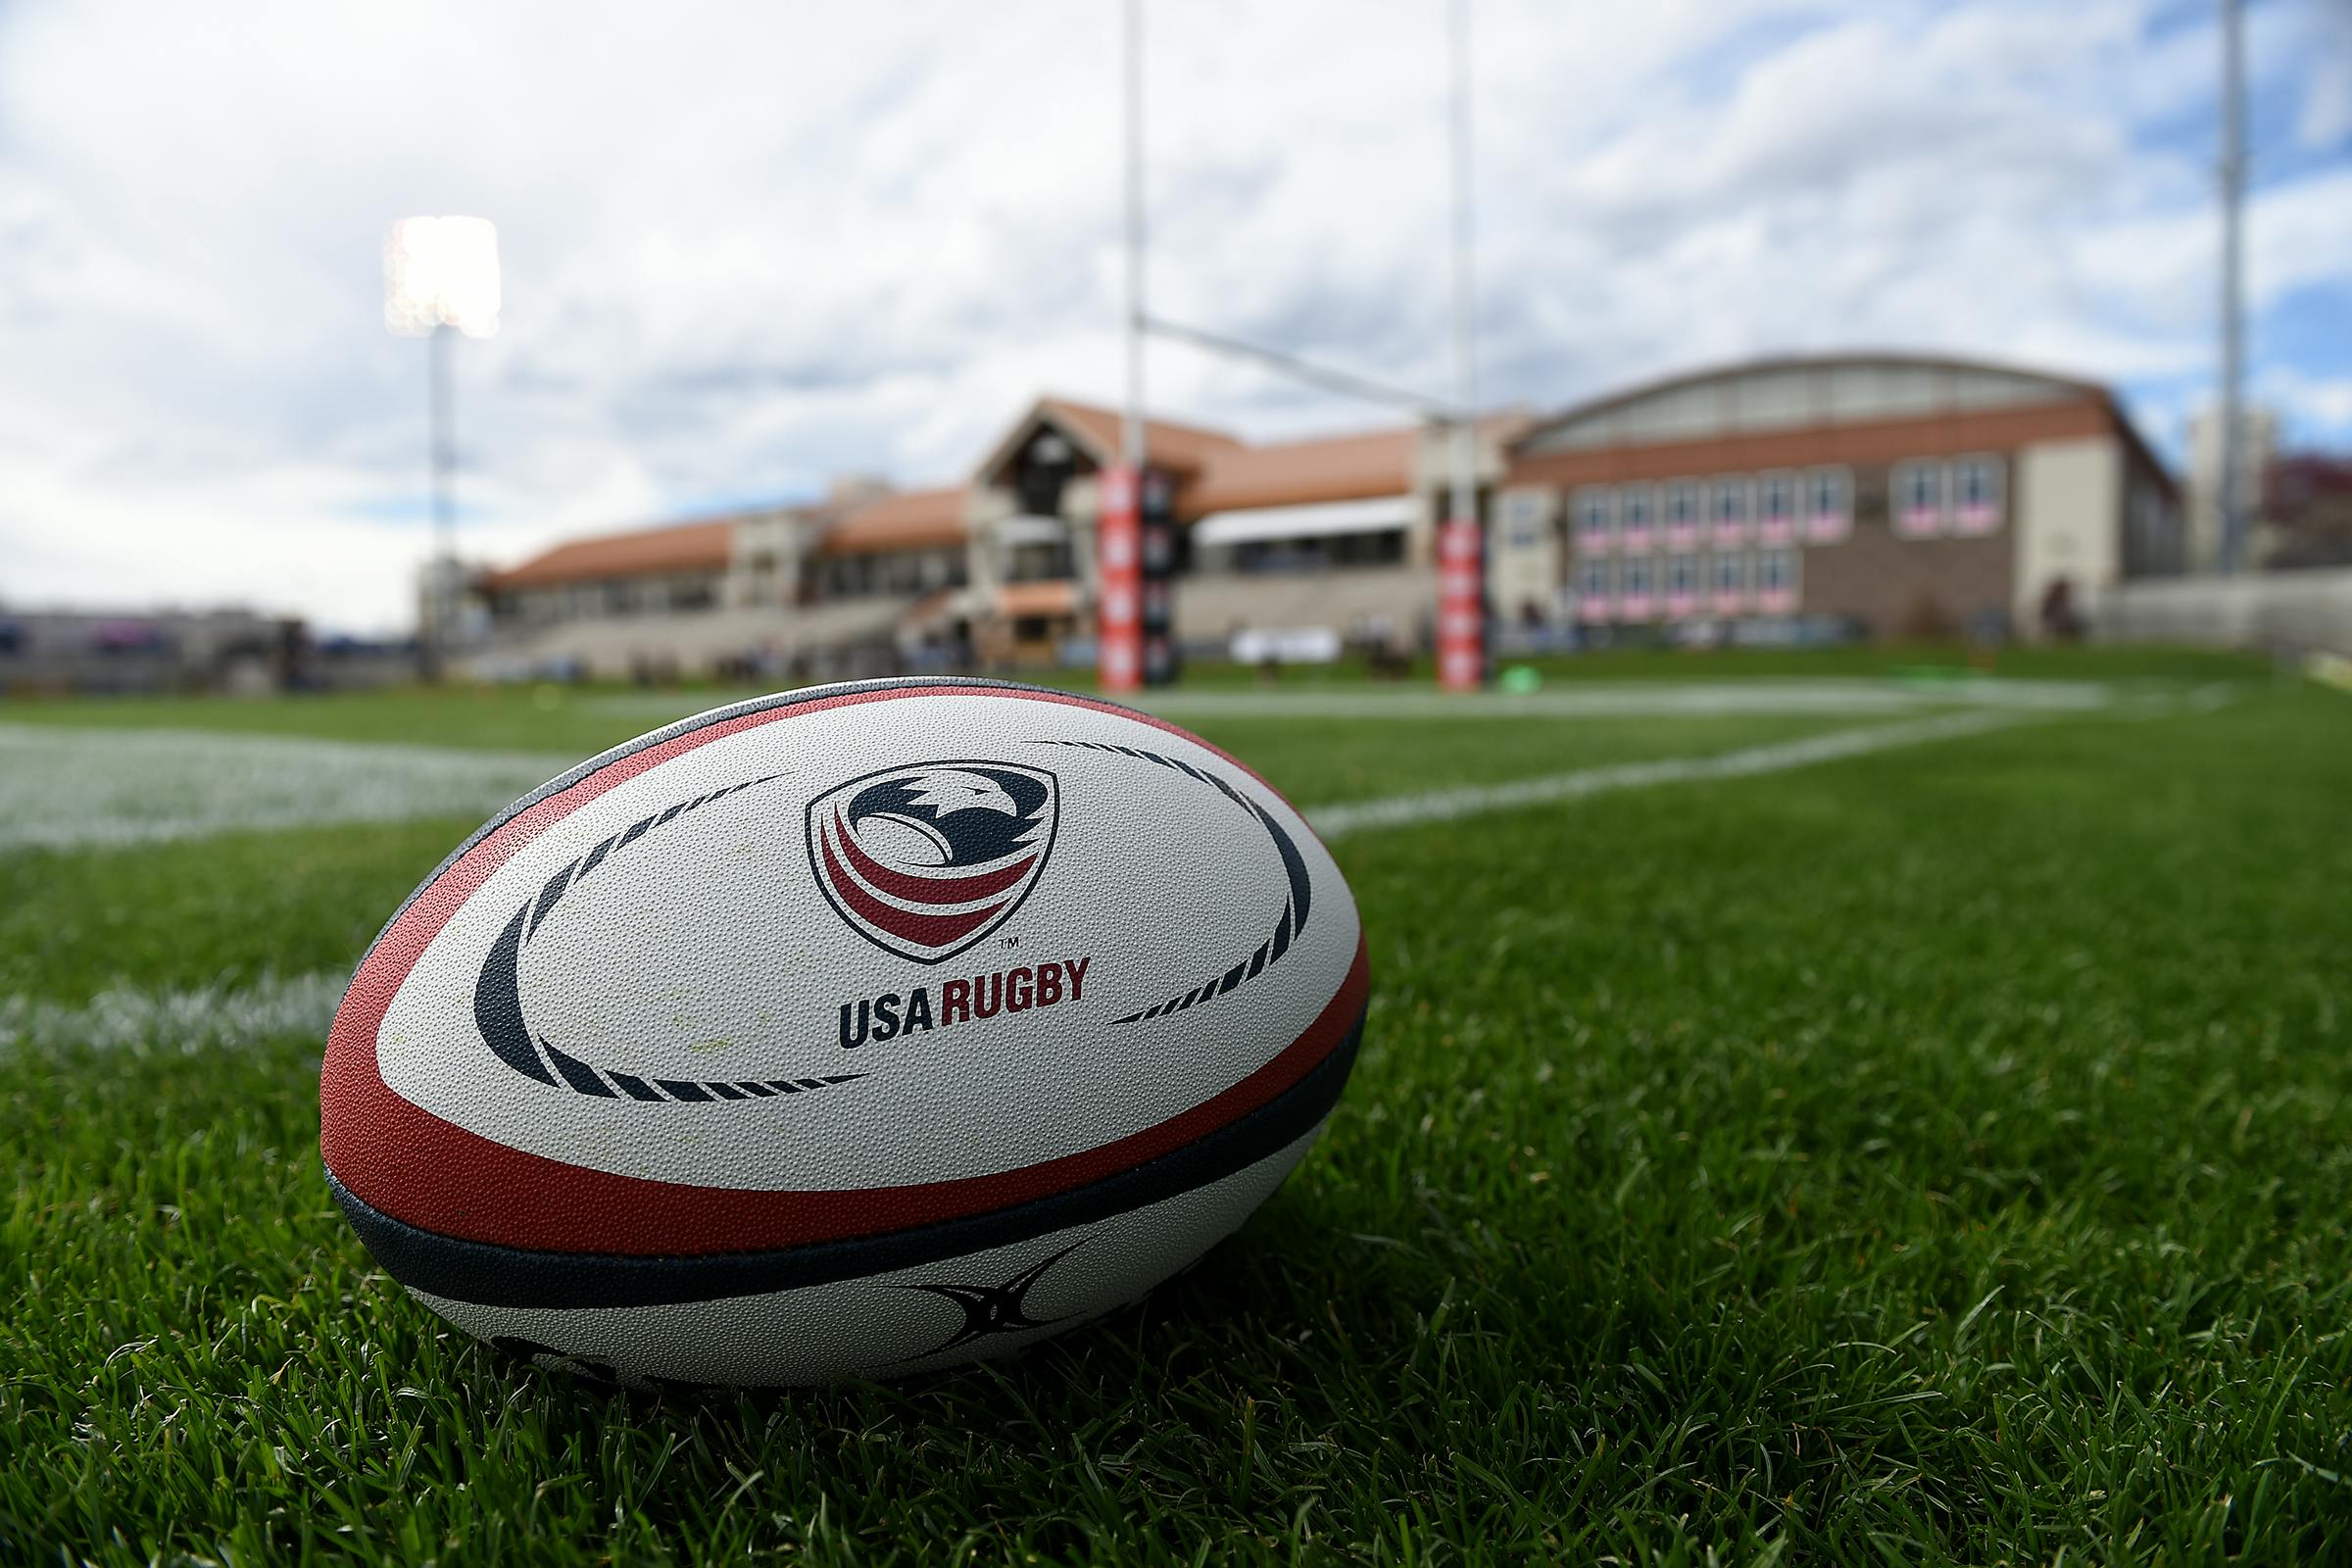 General USA Rugby